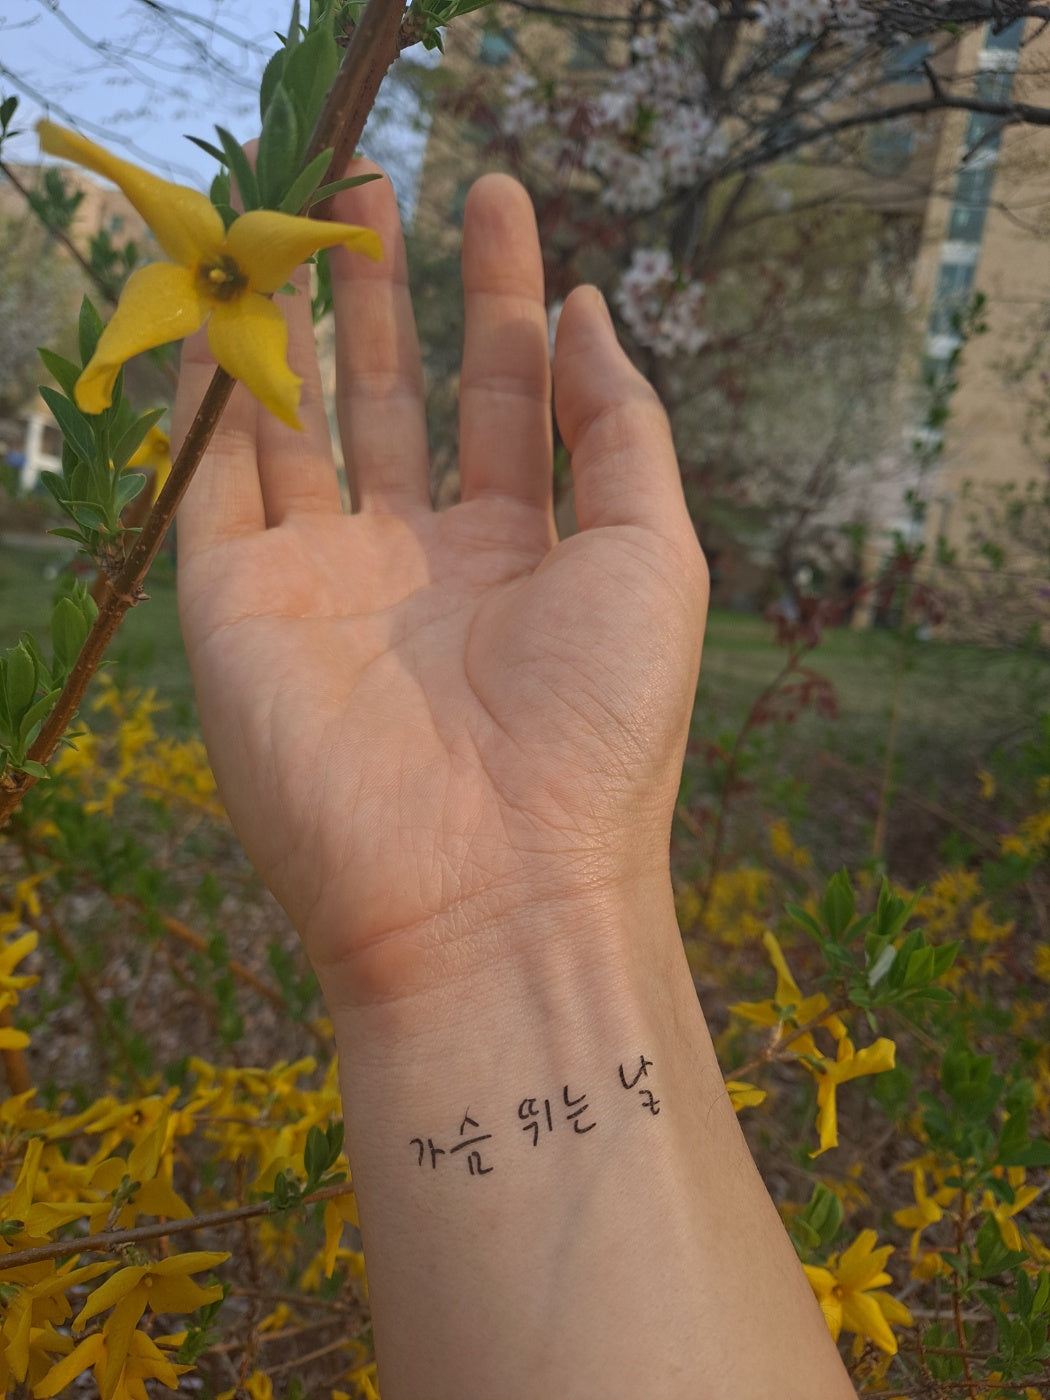 A hand gently touching a forsythia blossom, with a Hangul script temporary tattoo on the inner wrist, signifying a connection with nature